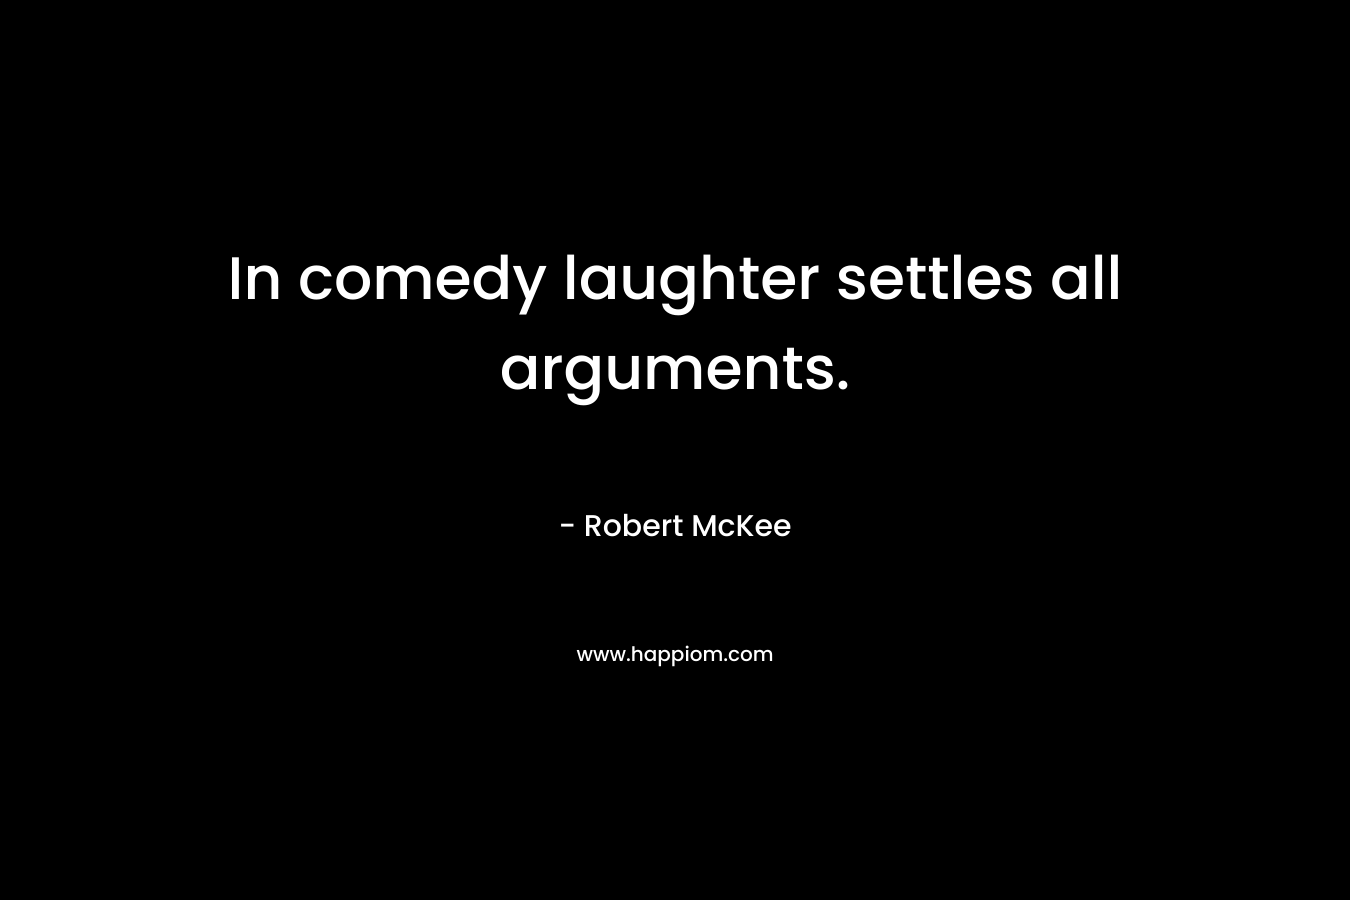 In comedy laughter settles all arguments. – Robert McKee